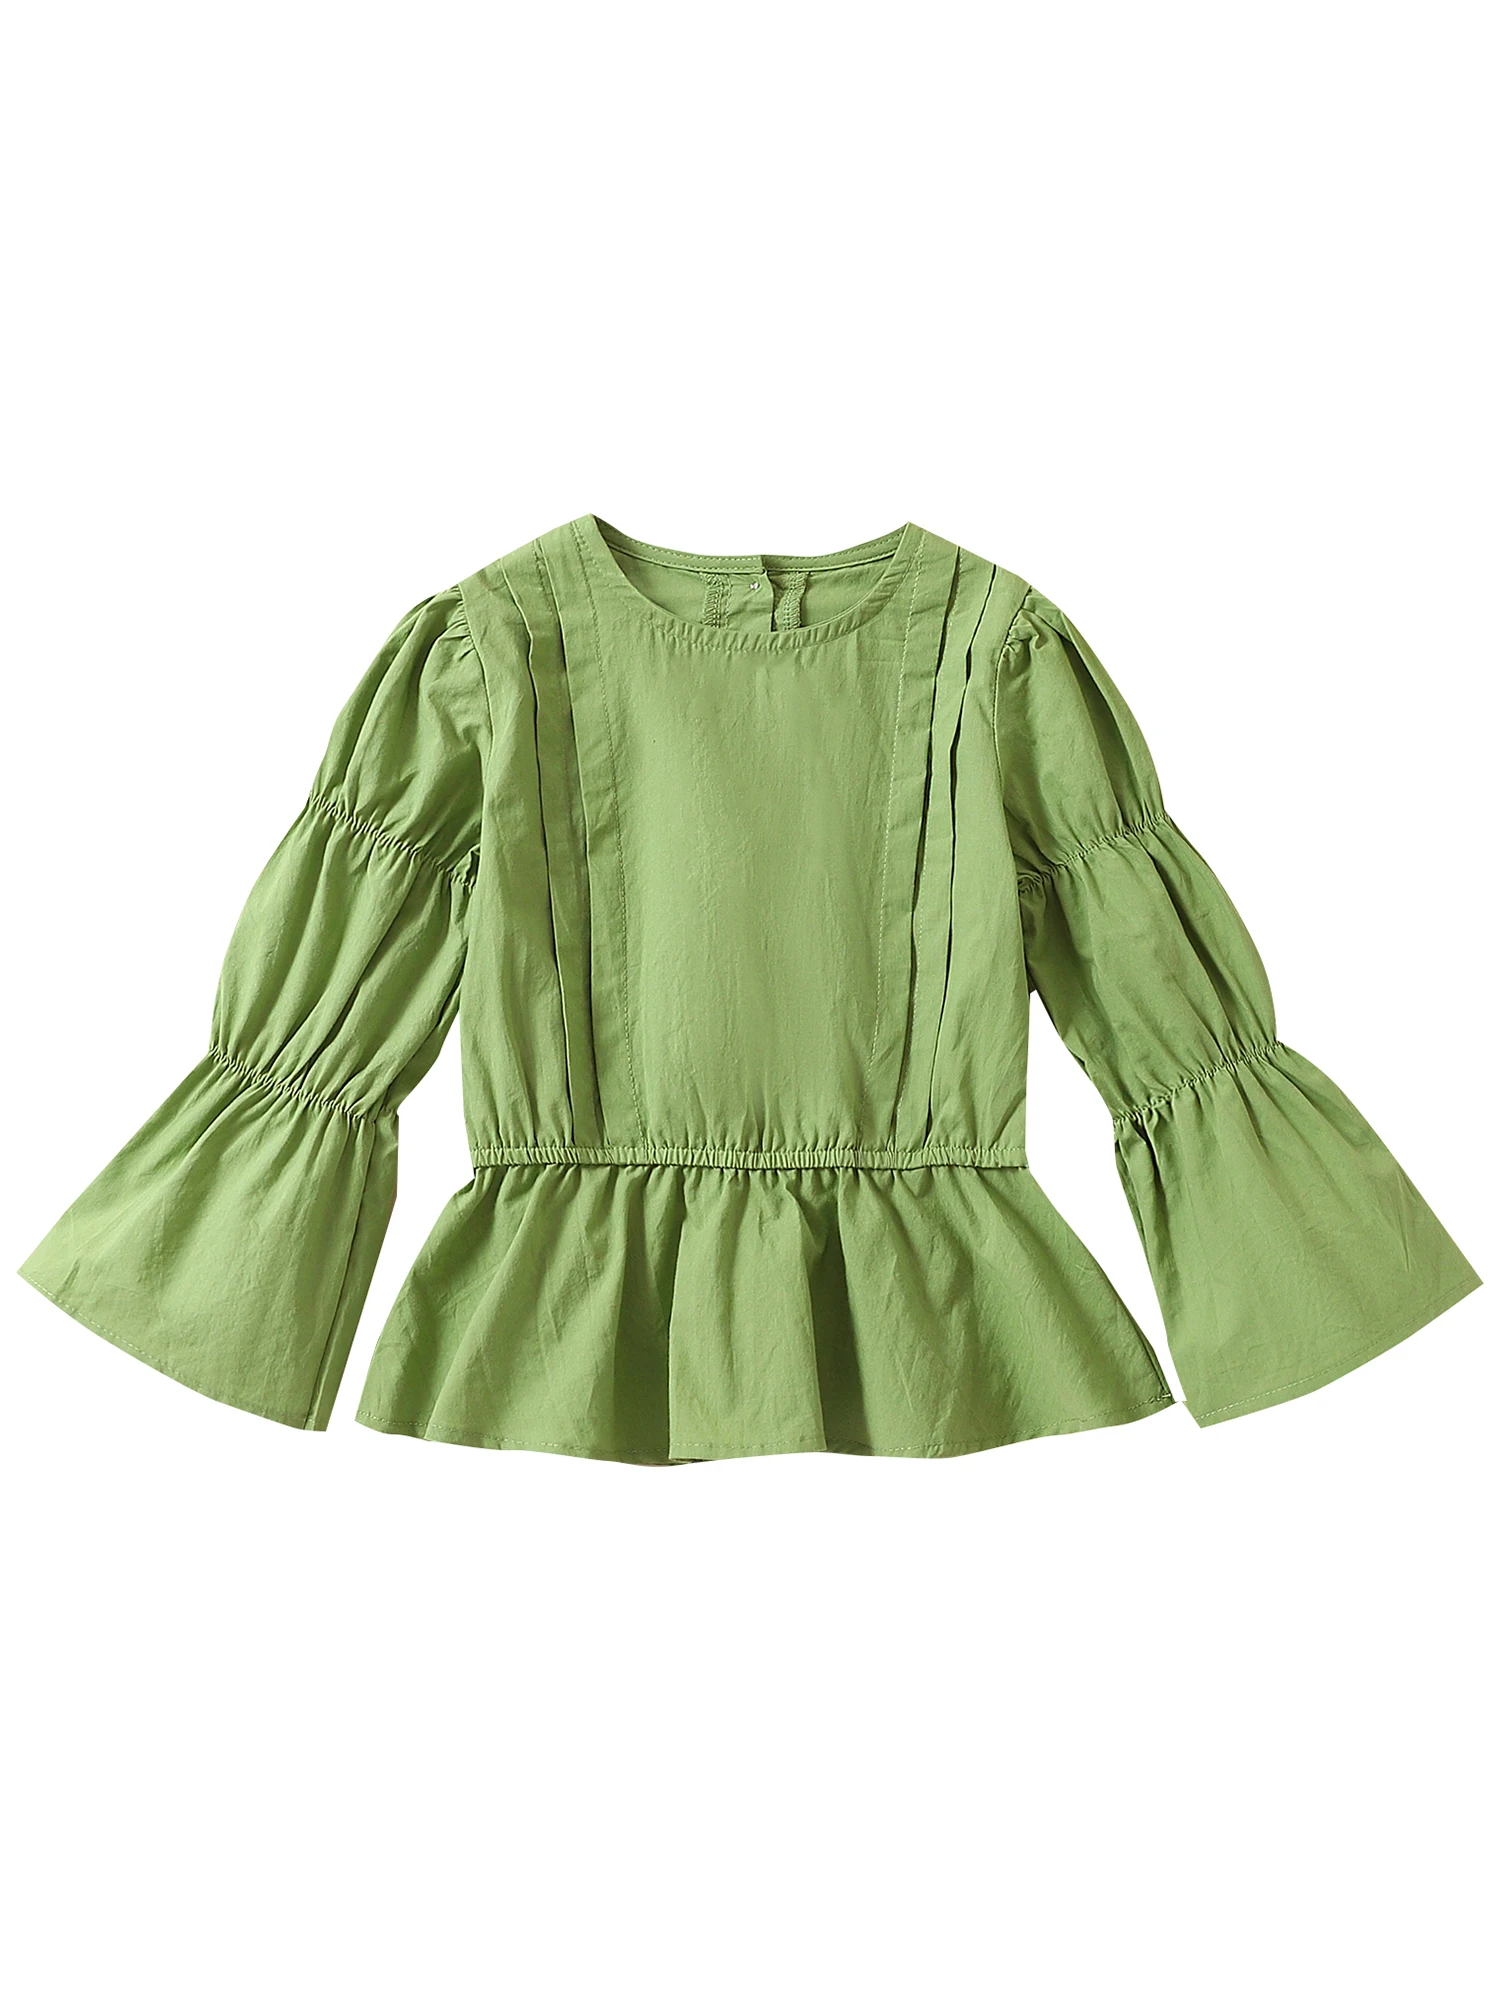 

Girls Long Sleeve Ruffle Blouses Stylish A-line Tunic Tops for Toddlers Crewneck Casual Fall Fashion Shirts (1-6 Years)